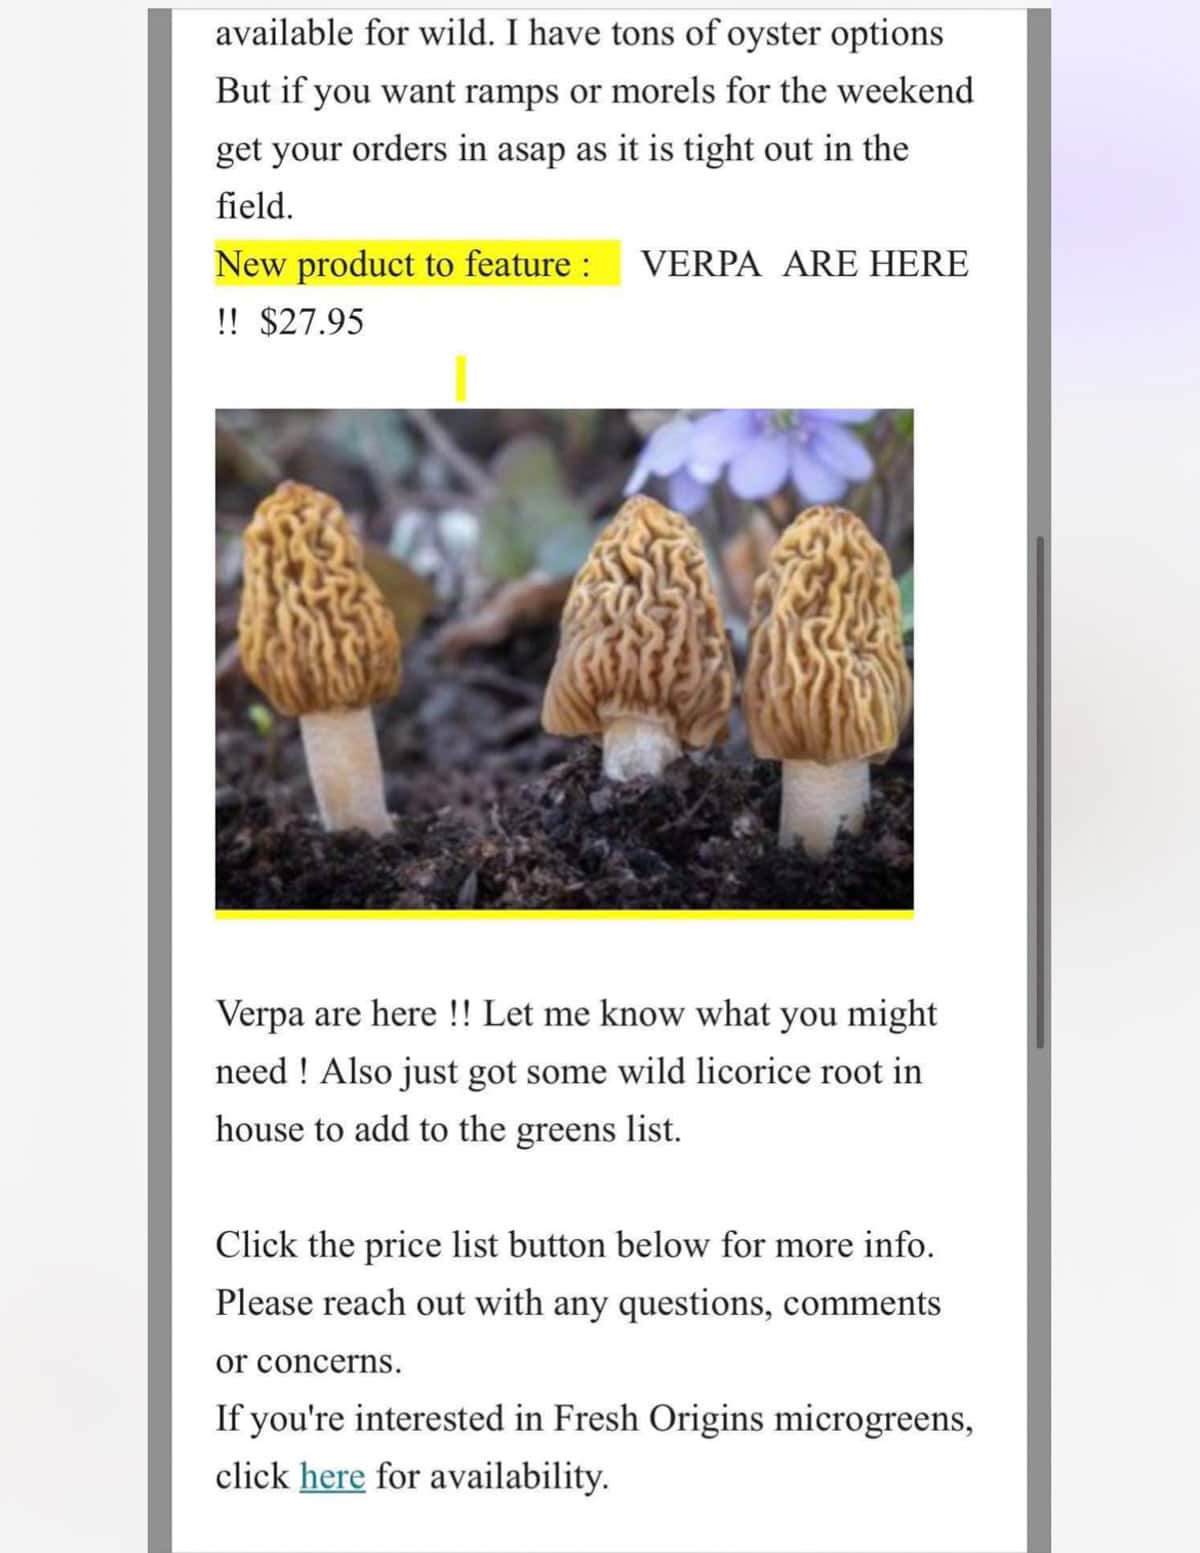 An image of Verpa bohemica mushrooms for sale at 27 dollar per pound. 